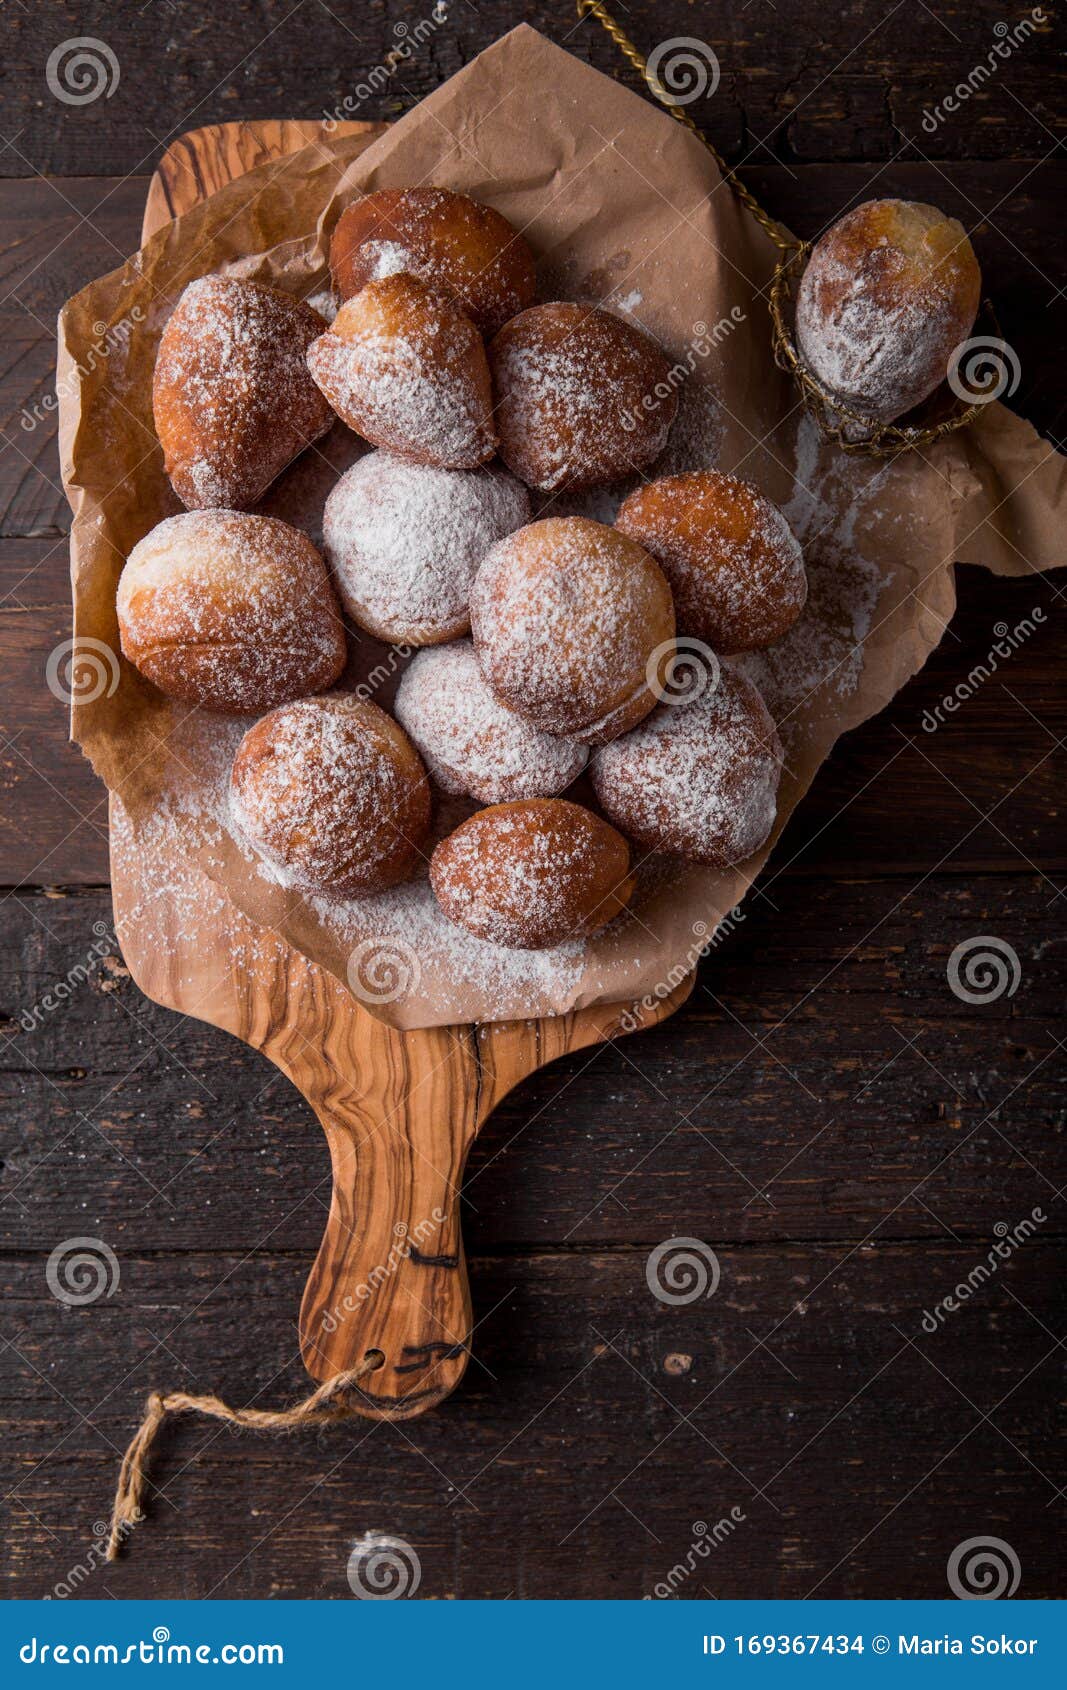 bunuelos mexican fritters golden, crispy-sweet, tortilla-like fritters. pile of bunyols de quaresma, typical pastries of